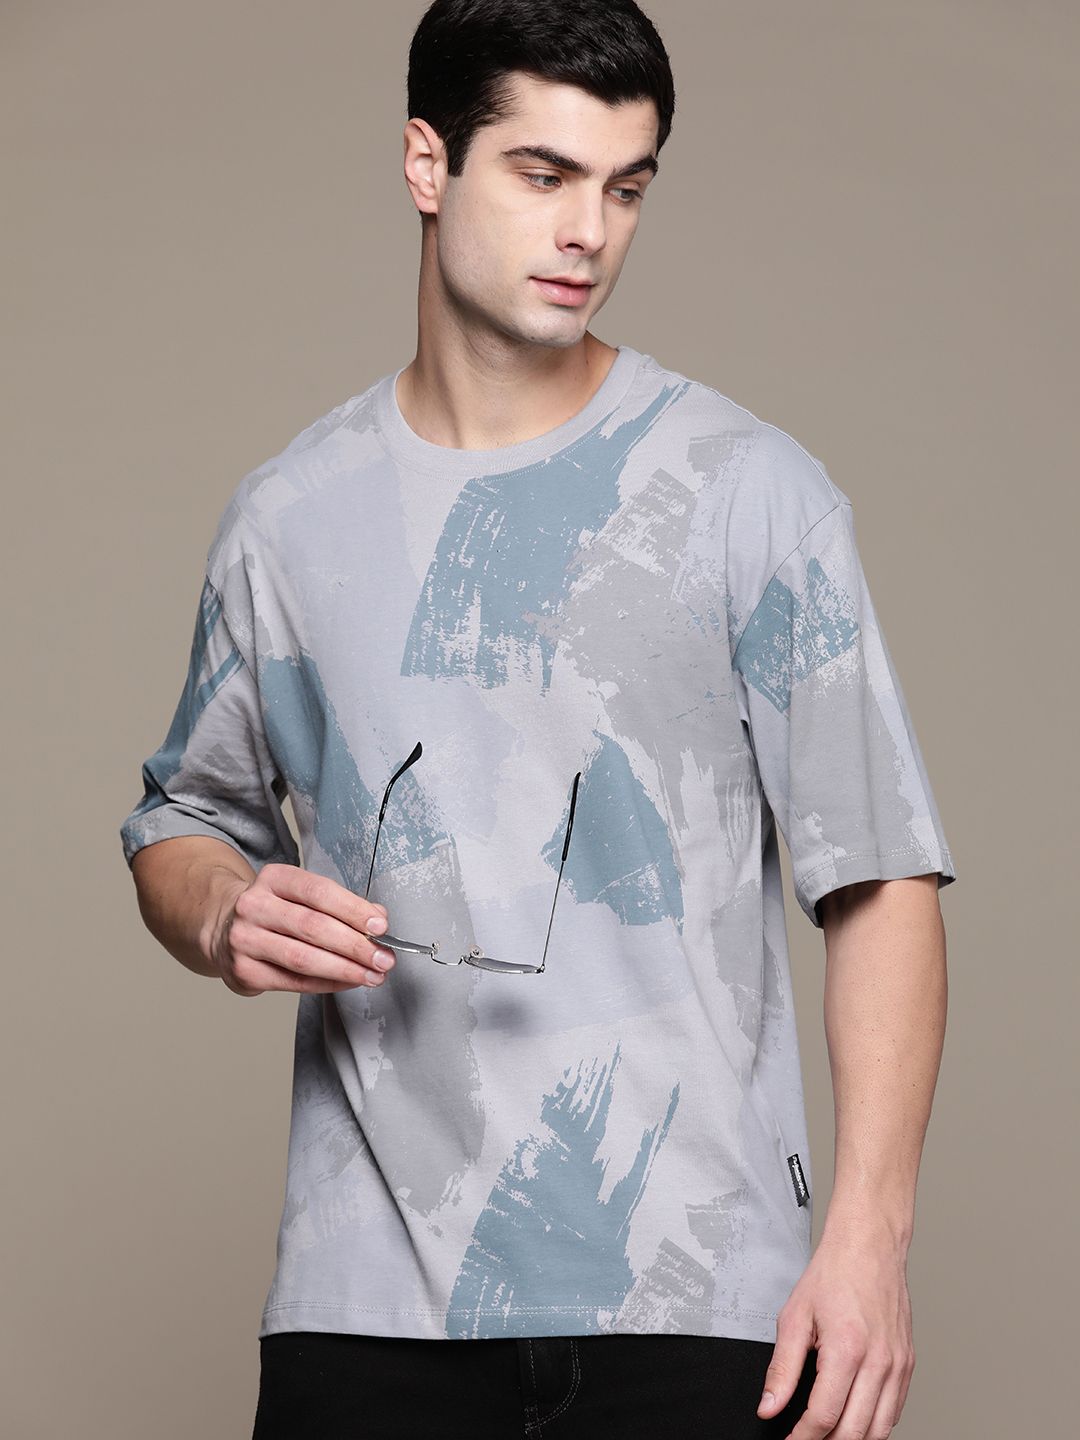 The Roadster Lifestyle Co. Men Printed Pure Cotton T-shirt